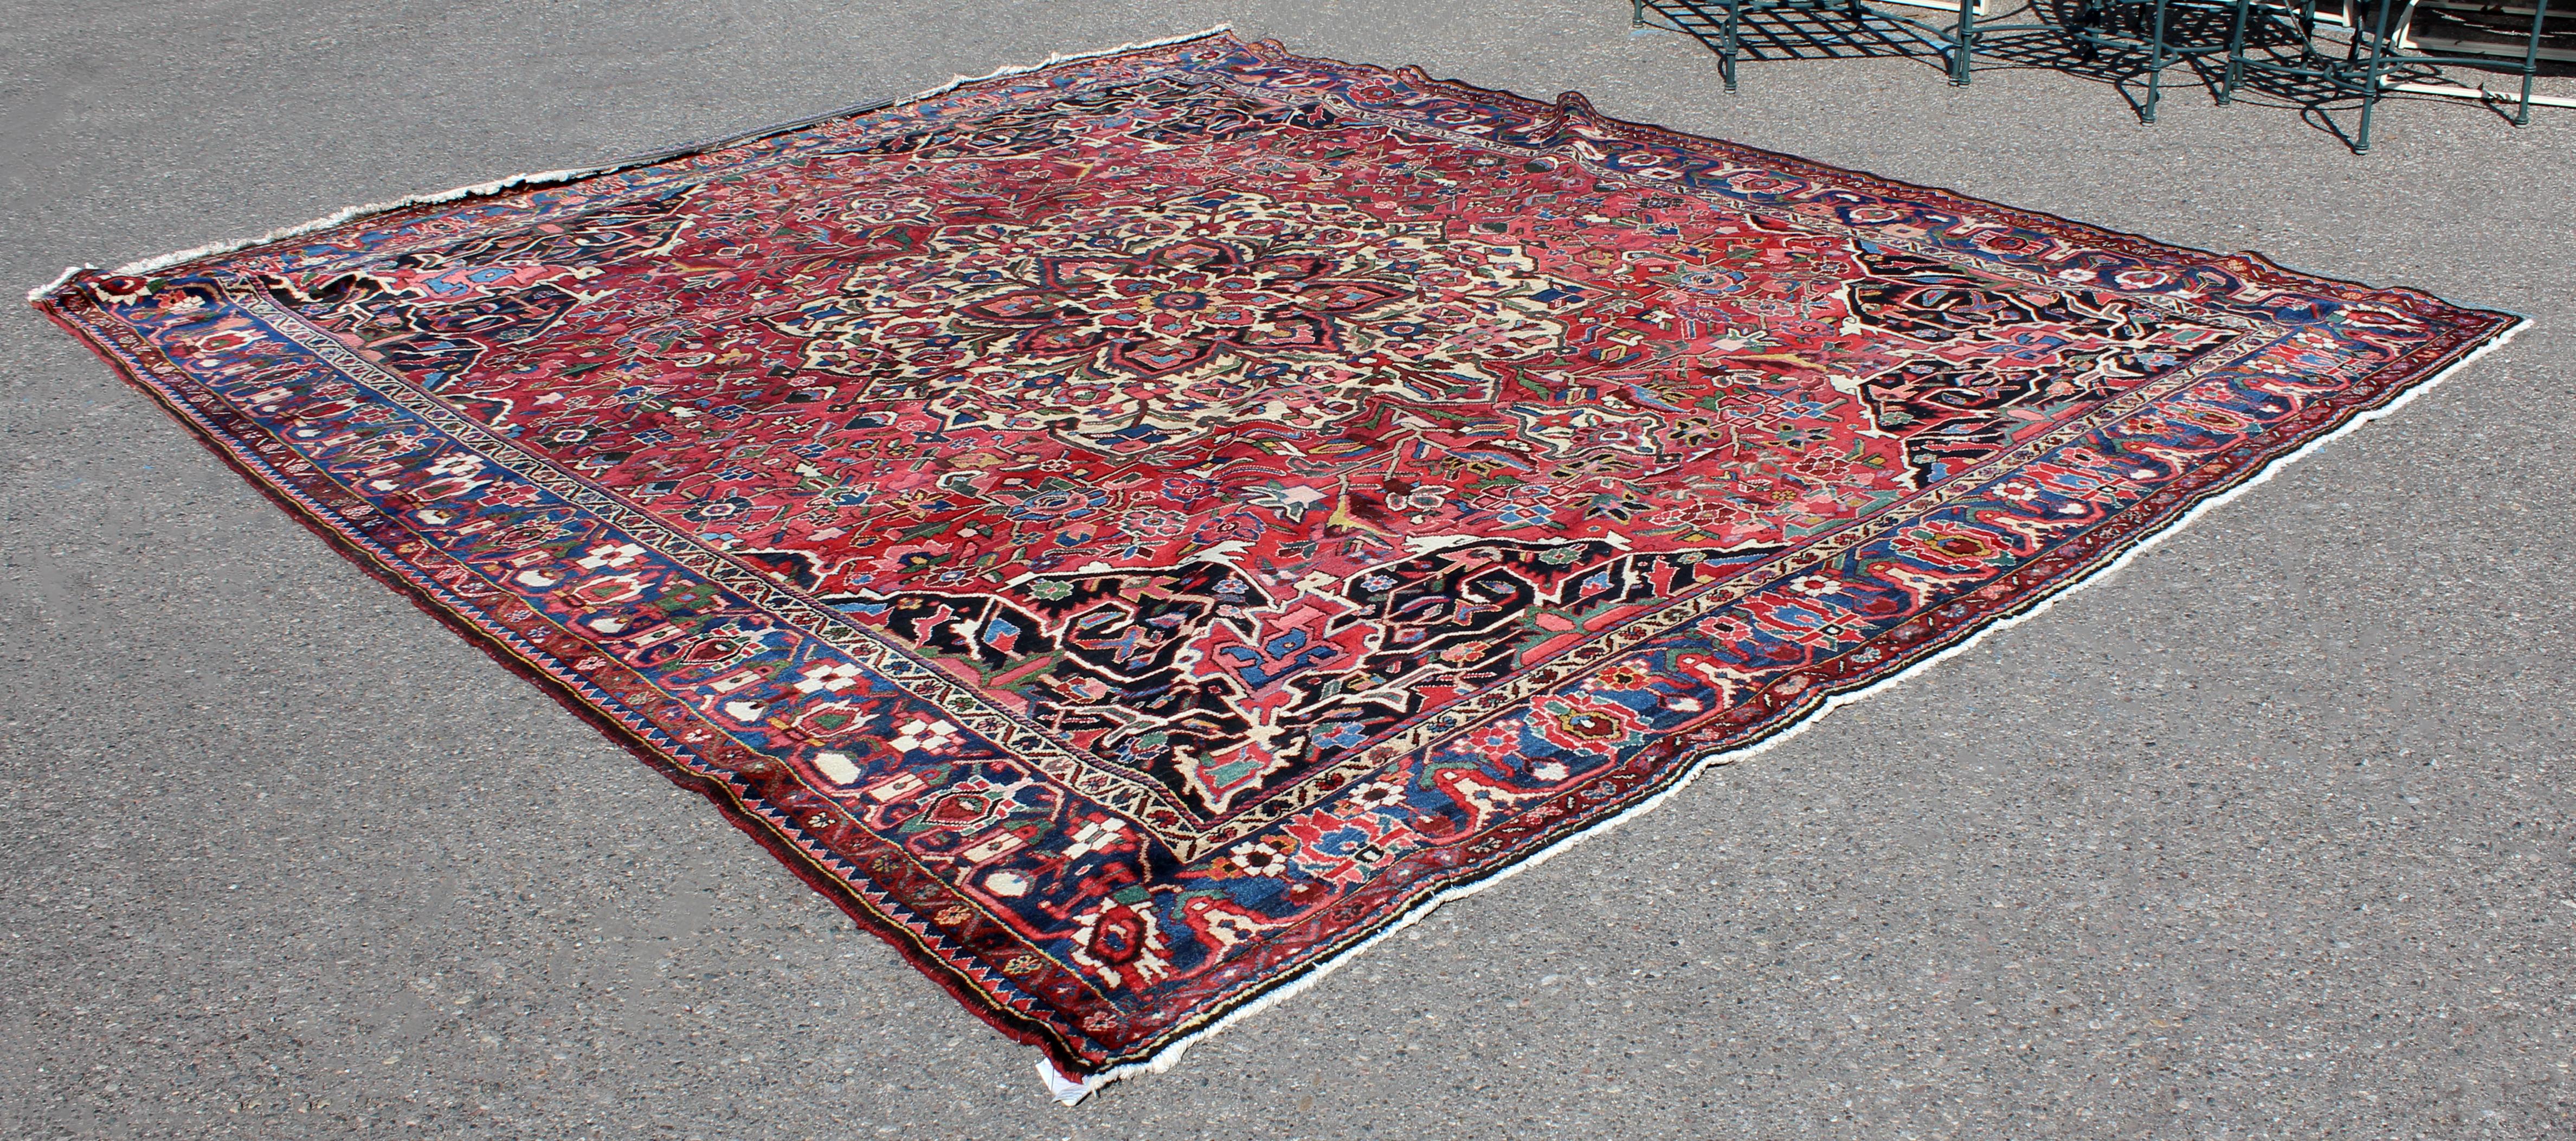 For your consideration is a beautiful, Bakhtiari style, Iranian area rug or carpet, made of 100% wool, vegetable dyed. In very good condition. The dimensions are 144